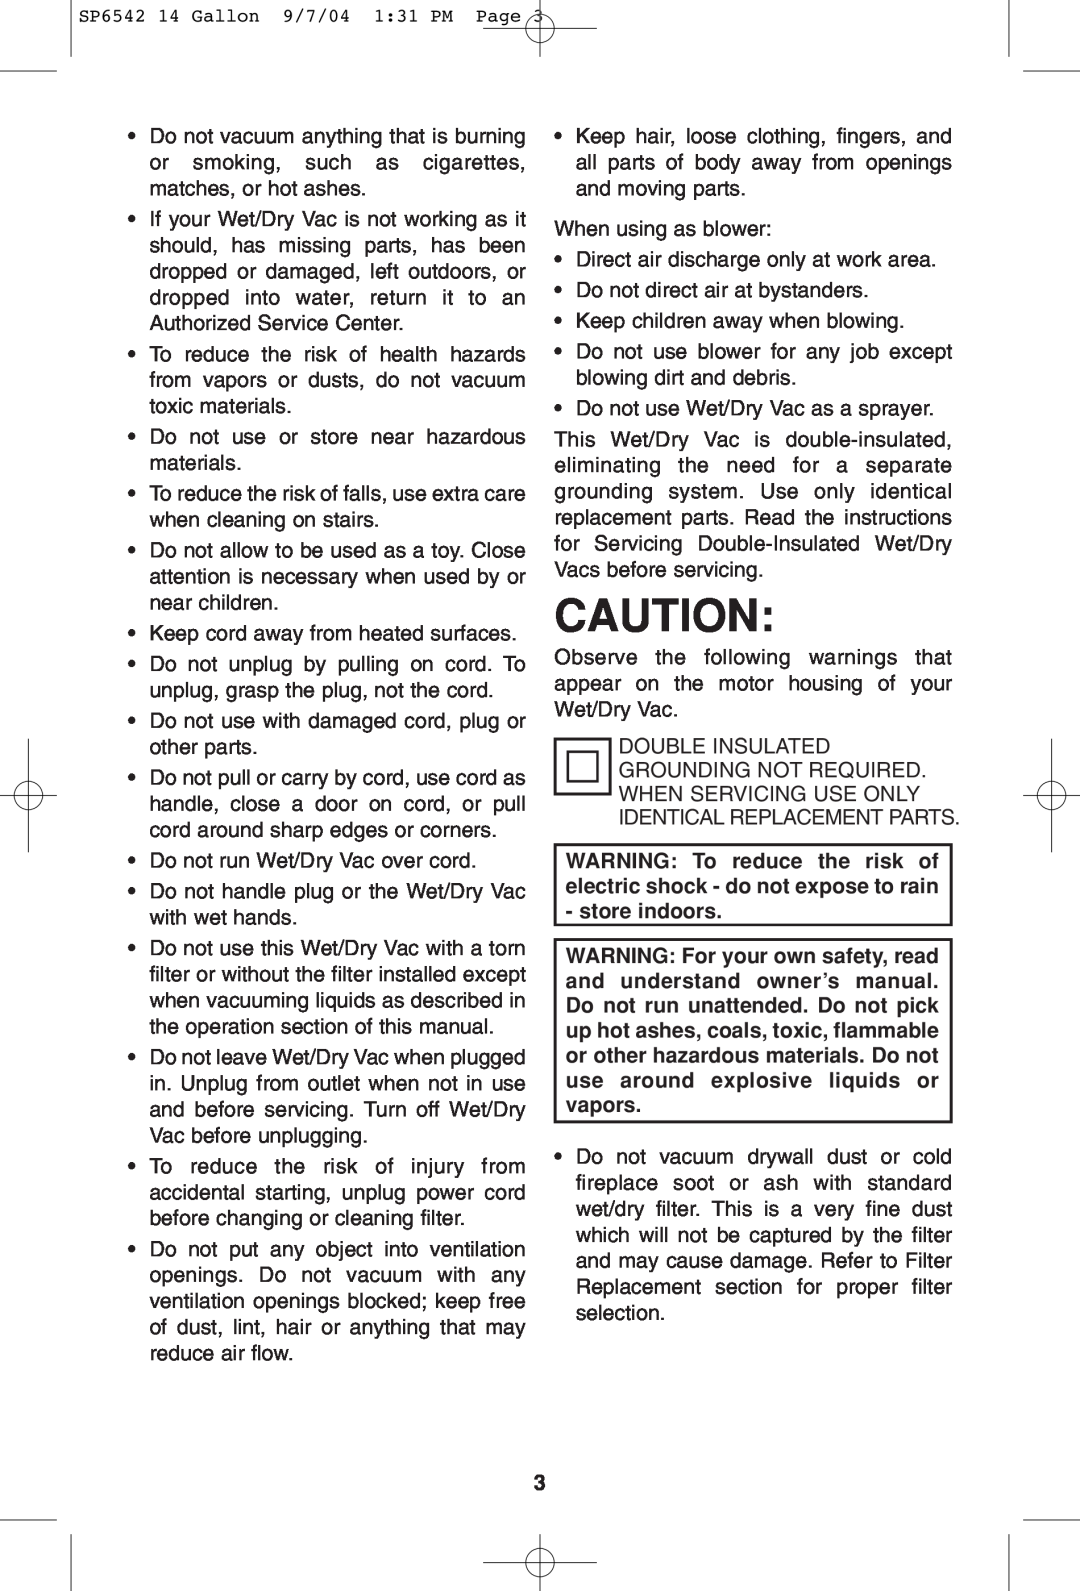 RIDGID WD1450 owner manual WARNING To reduce the risk of electric shock - do not expose to rain - store indoors 